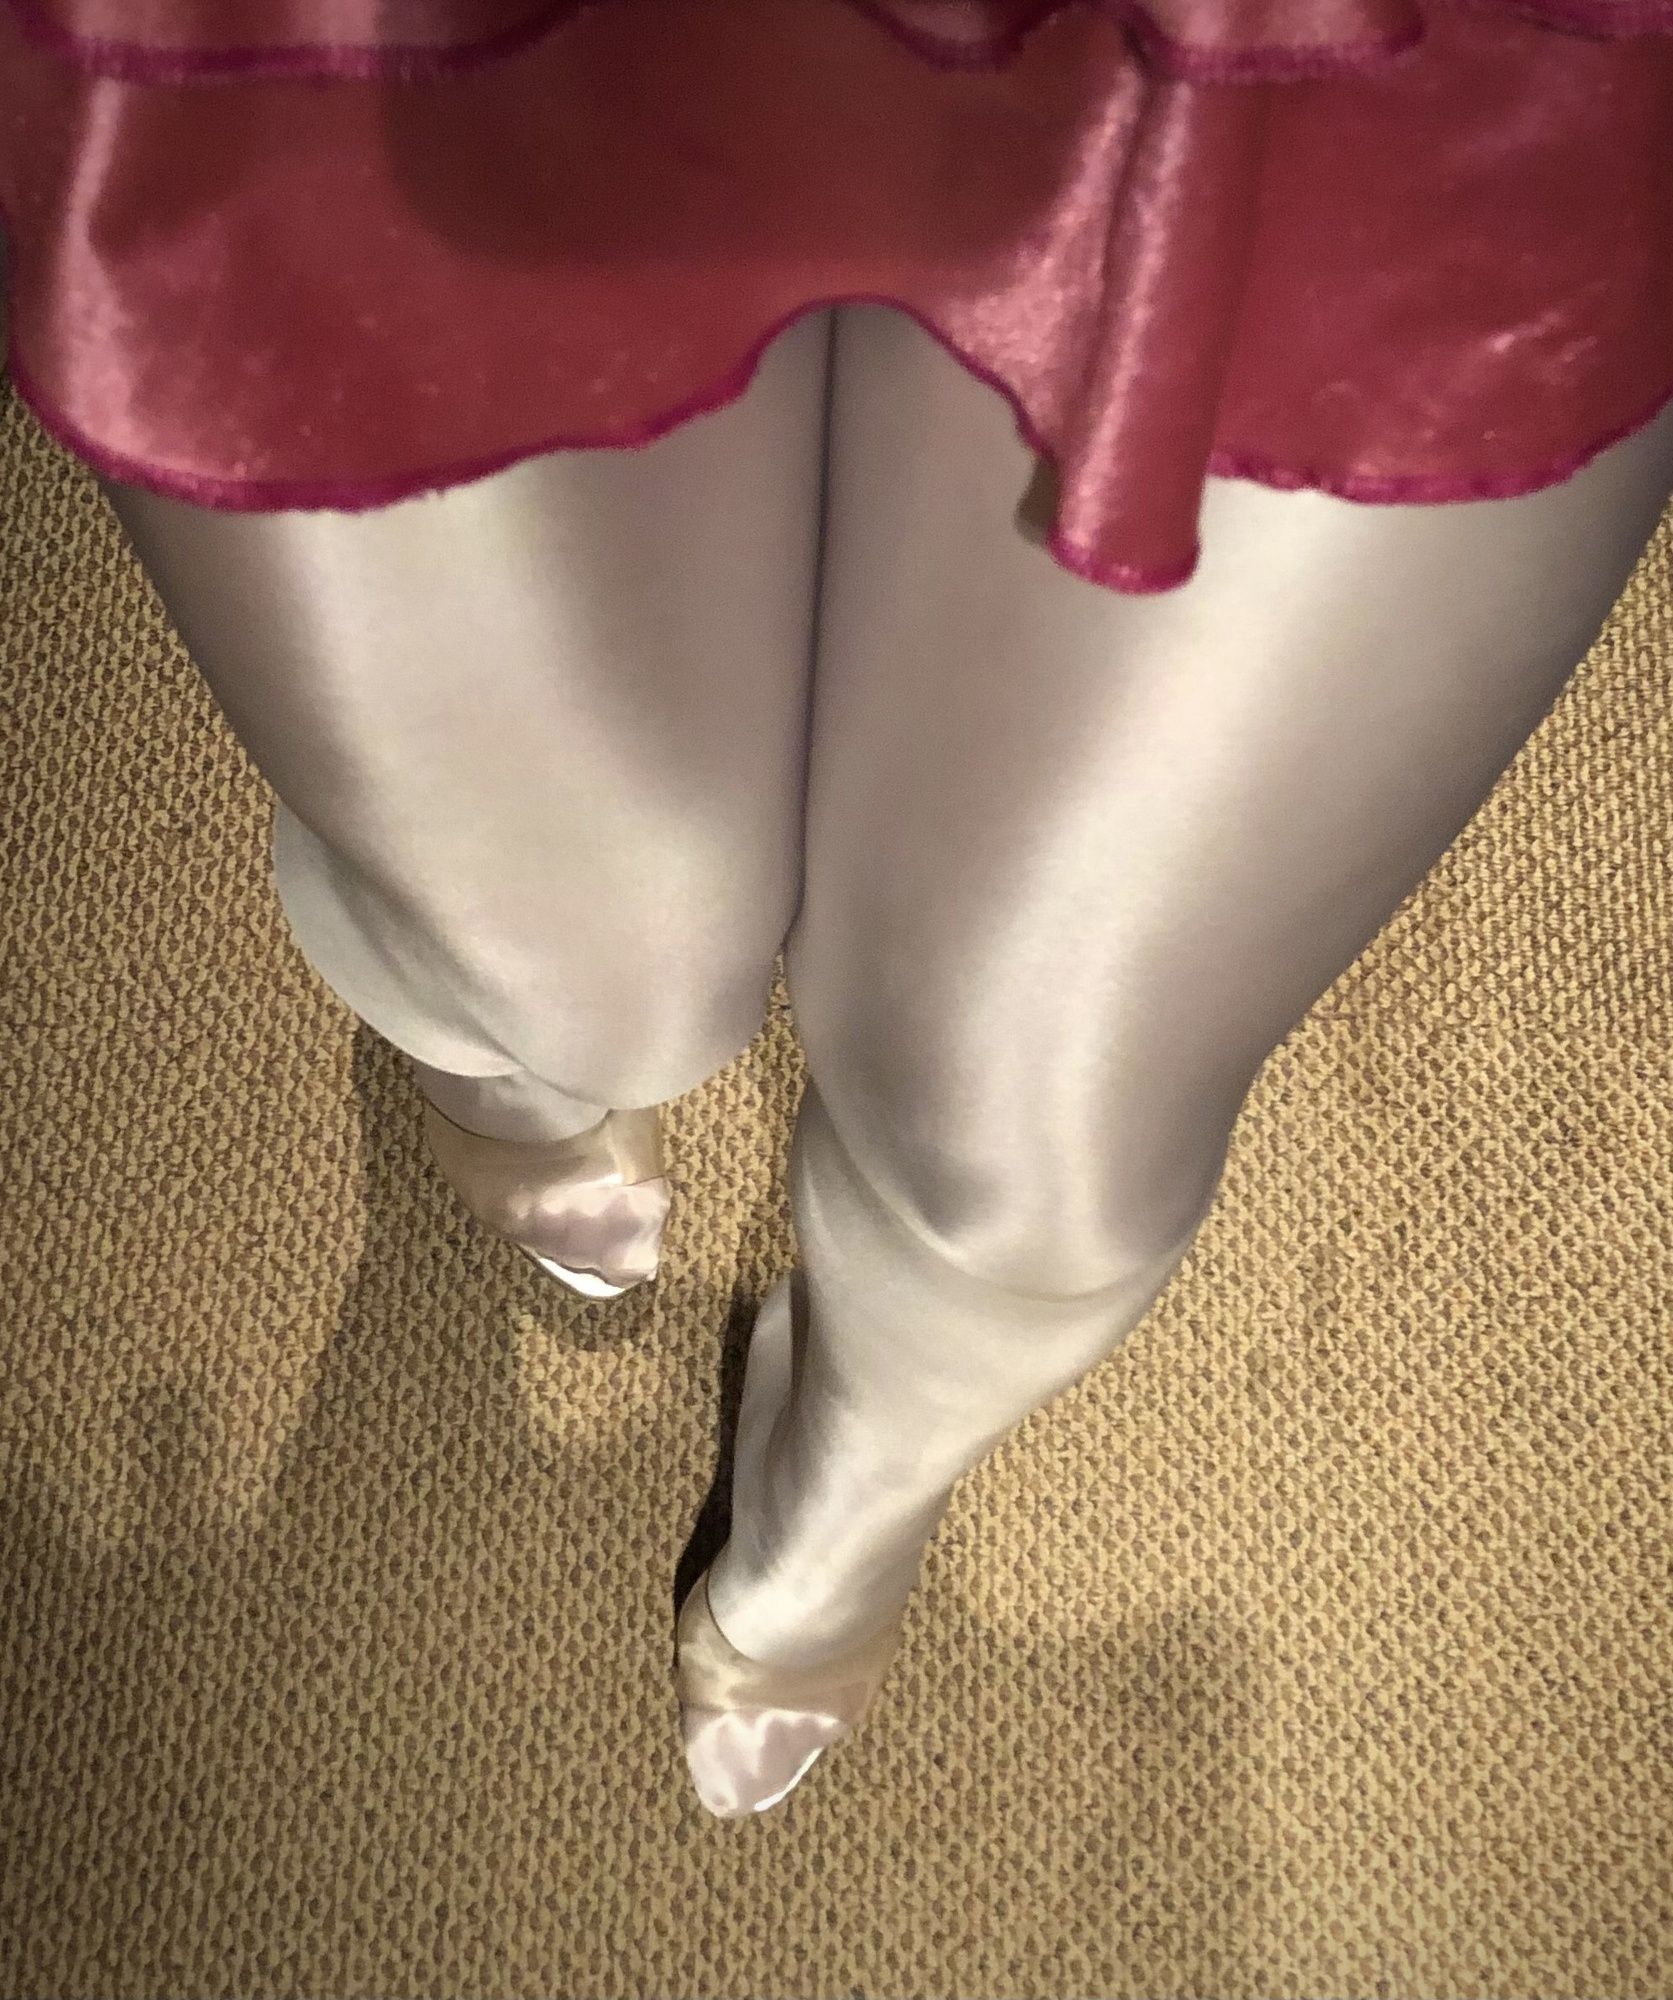 So brighty white glossy tights and super high heels.